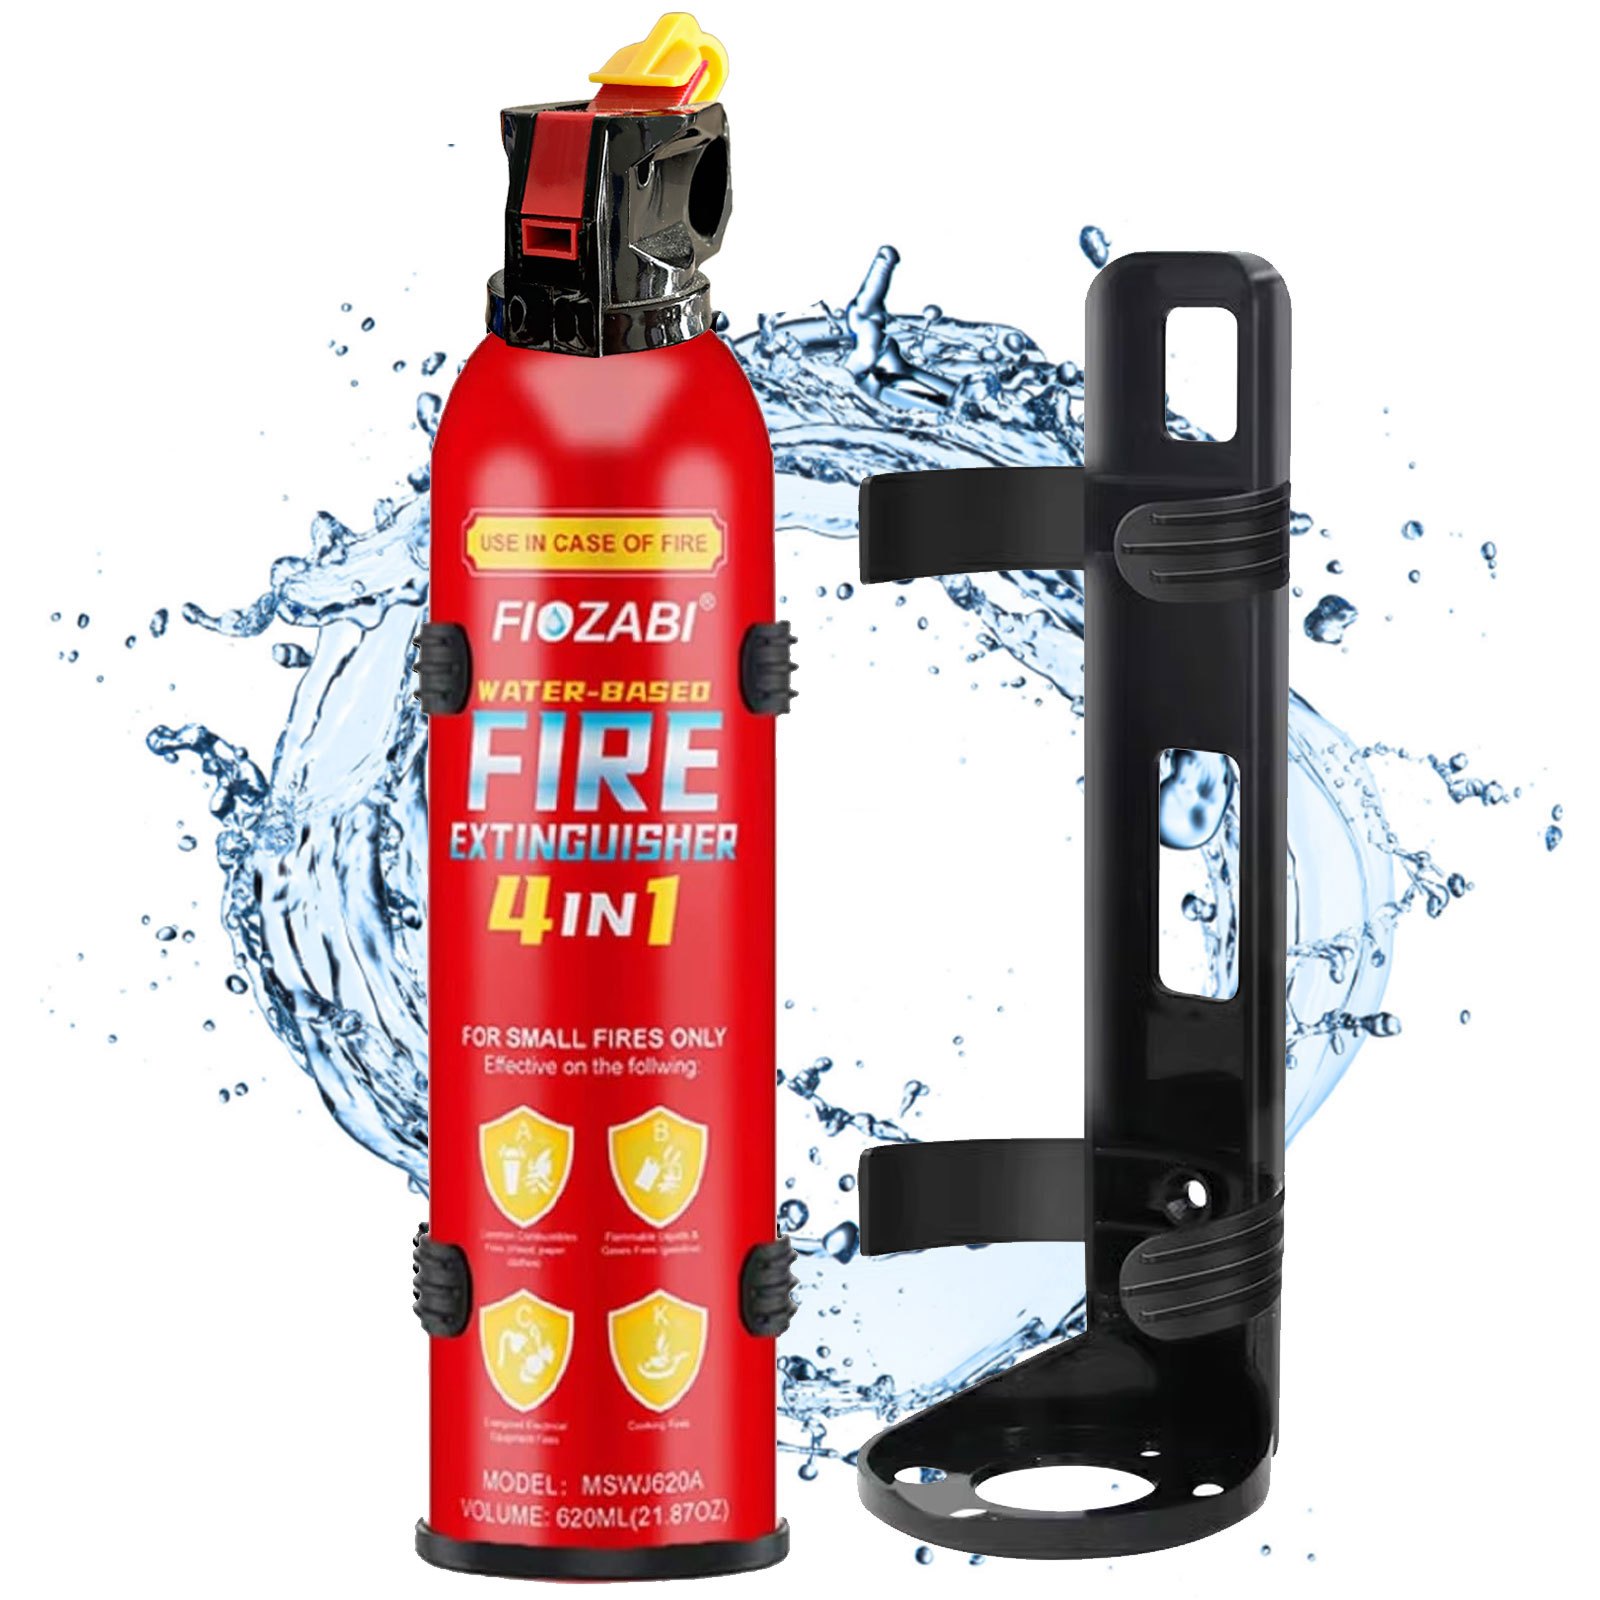 

1pc/2pcs/4pcs Portable Fire Extinguisher With Mount 4-in-1 Fire Extinguishers For The House Portable Car Fire Extinguisher Water-based 620ml